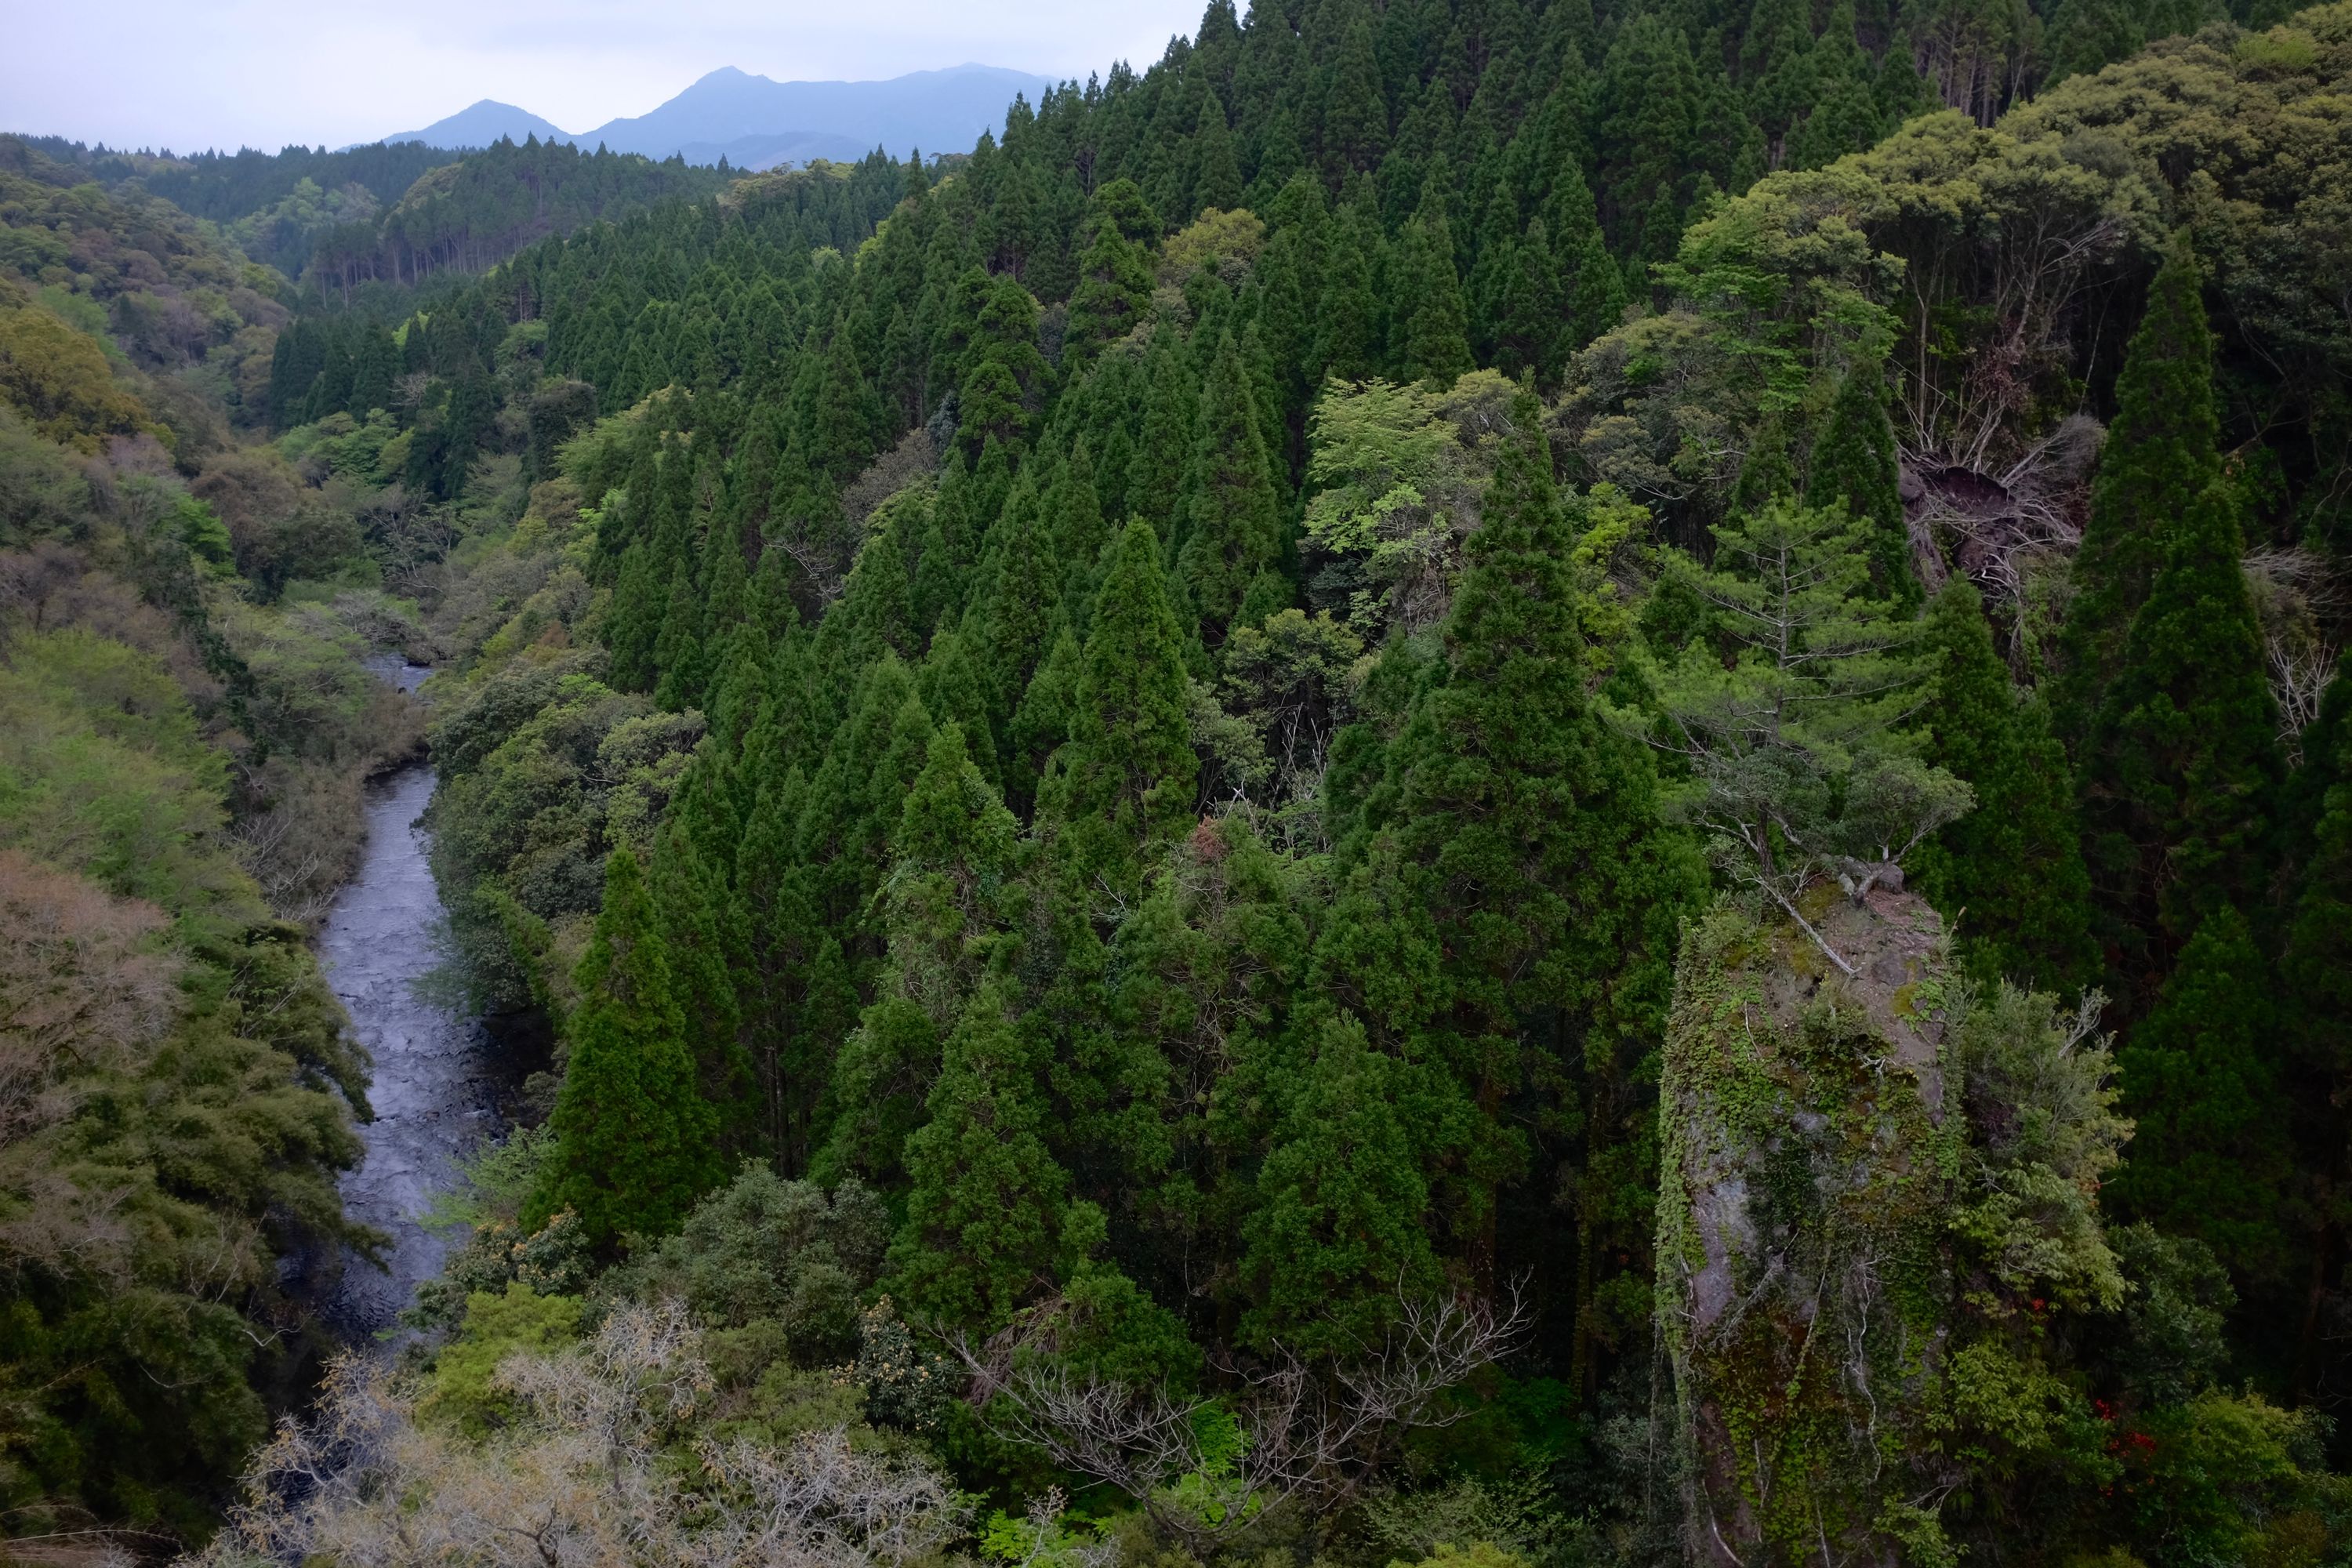 Looking down from a bridge into a steep, forested gorge, with mountains on the horizon.